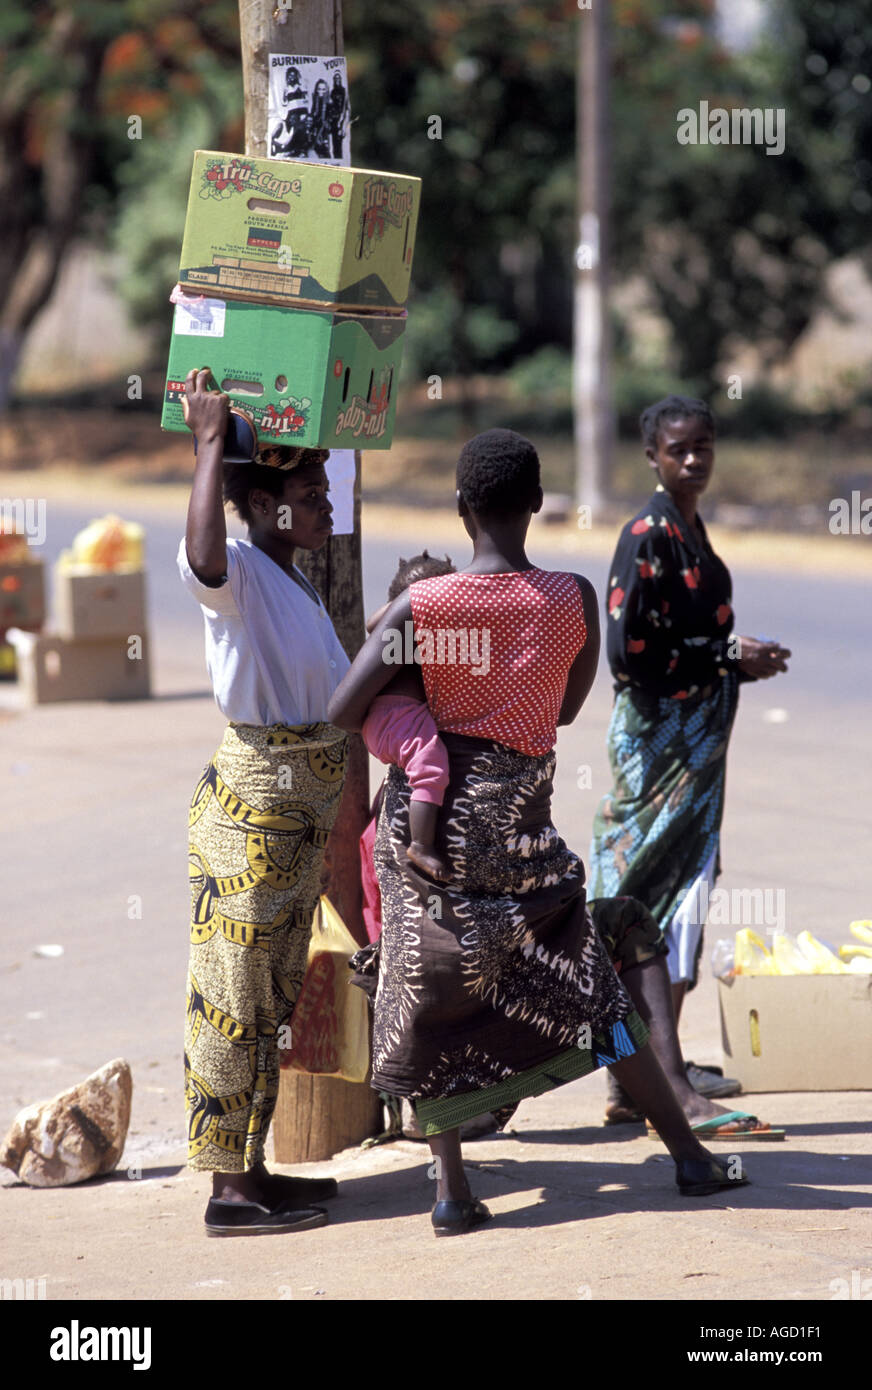 Zambia Africa Lusaka women with boxes on head Stock Photo